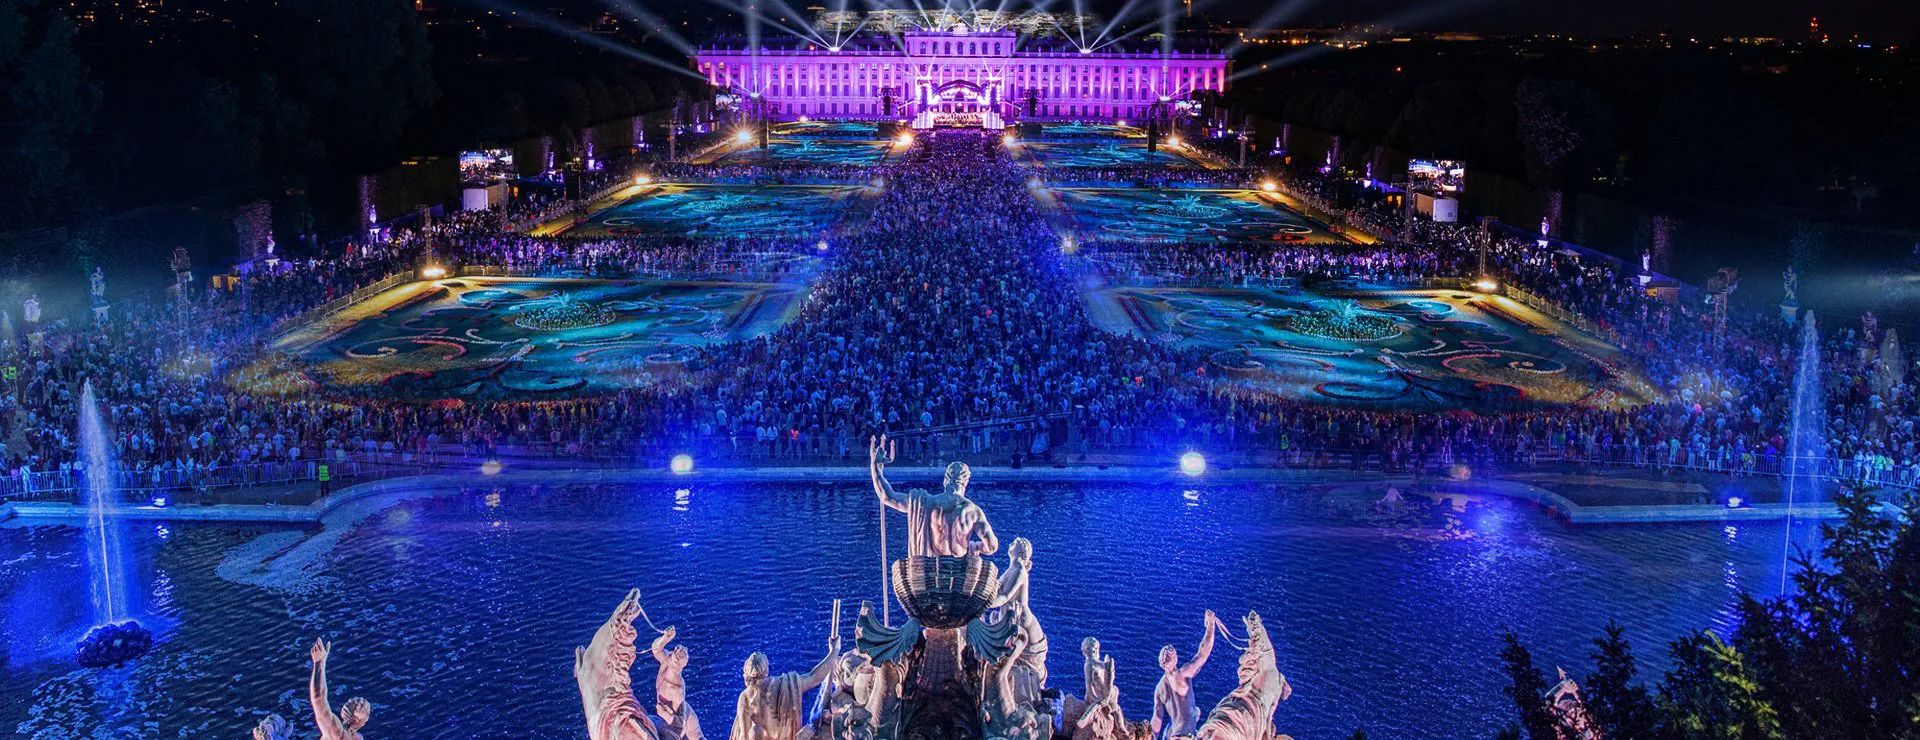 Summer night concert of the Vienna Philharmonic Orchestra, evening atmosphere, the palace garden is colorfully illuminated, guests stand in the palace garden